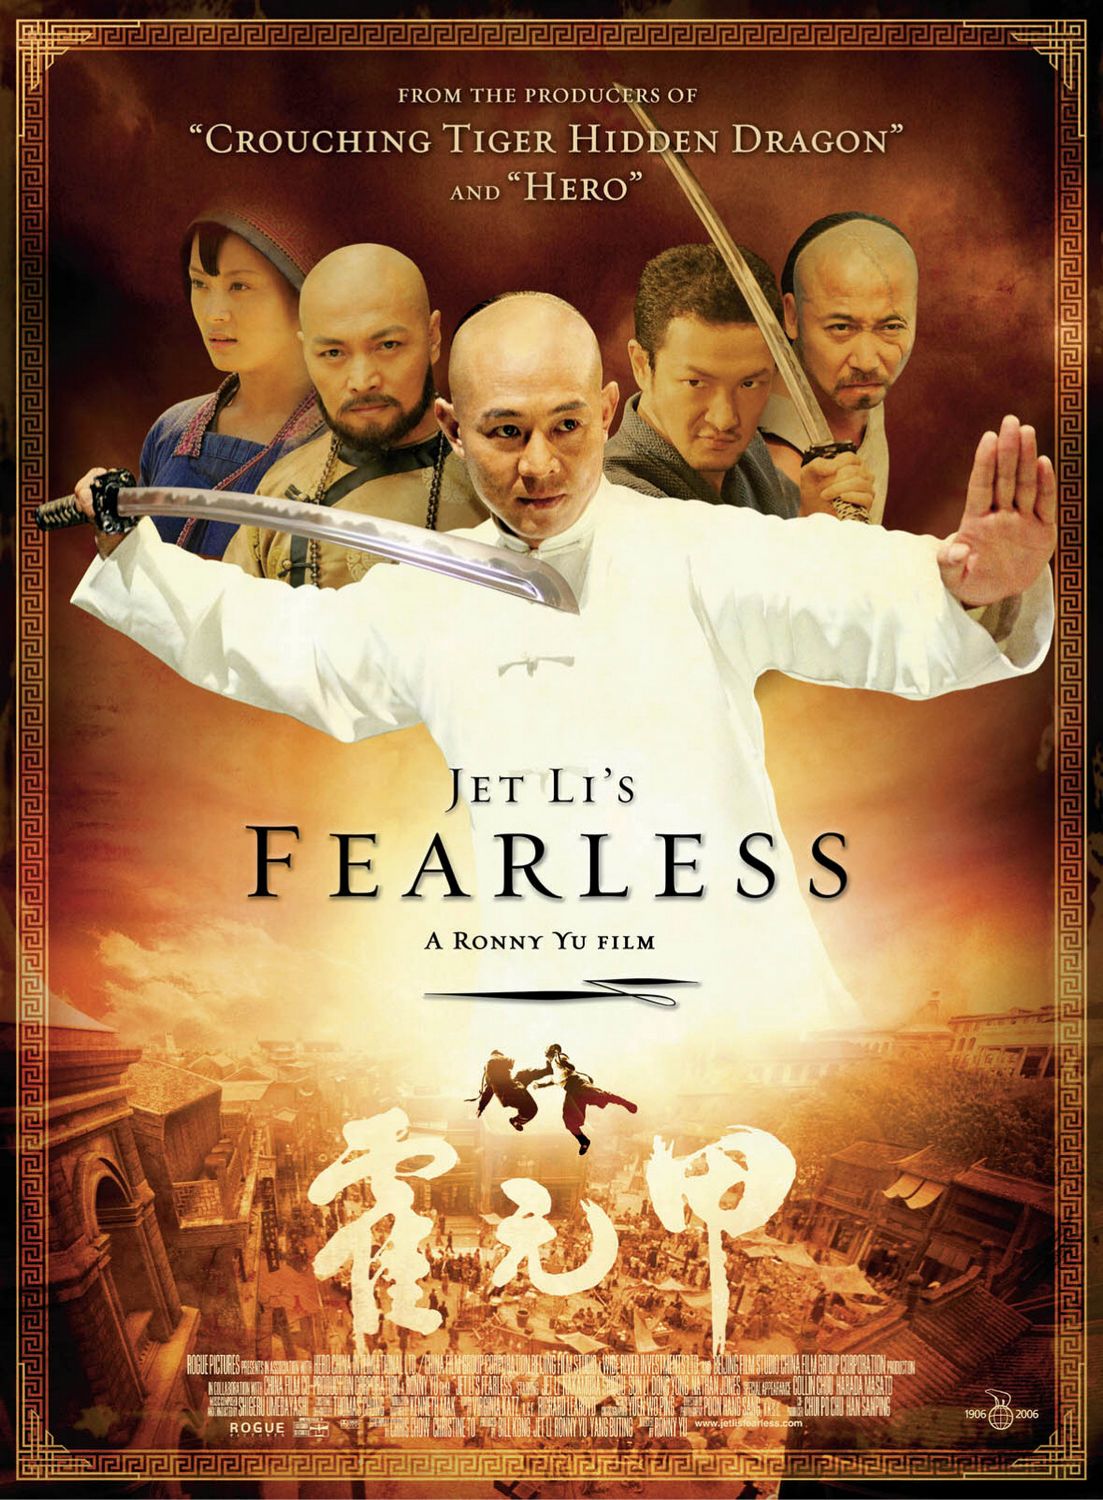 Extra Large Movie Poster Image for Fearless (#6 of 7)